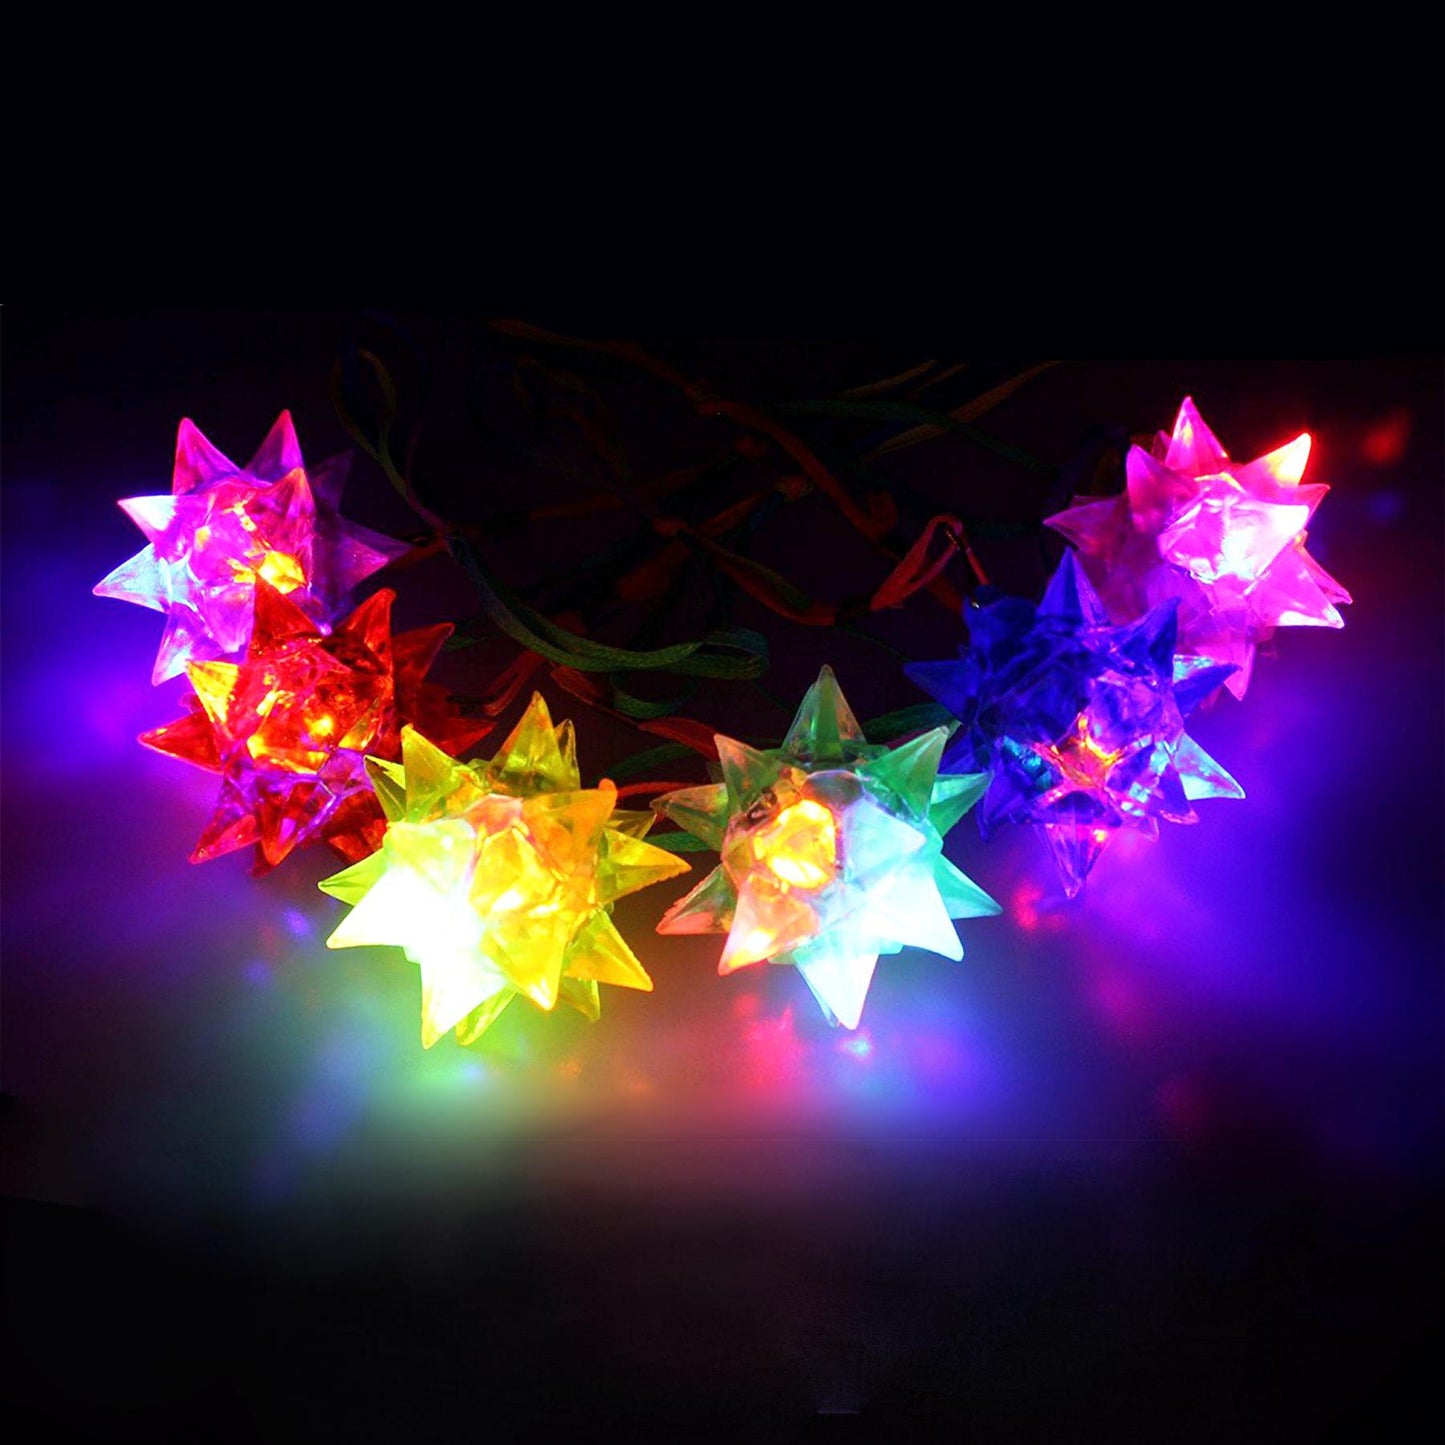 Flashing Crystal Bouncy Ball by The Magic Toy Shop - UKBuyZone